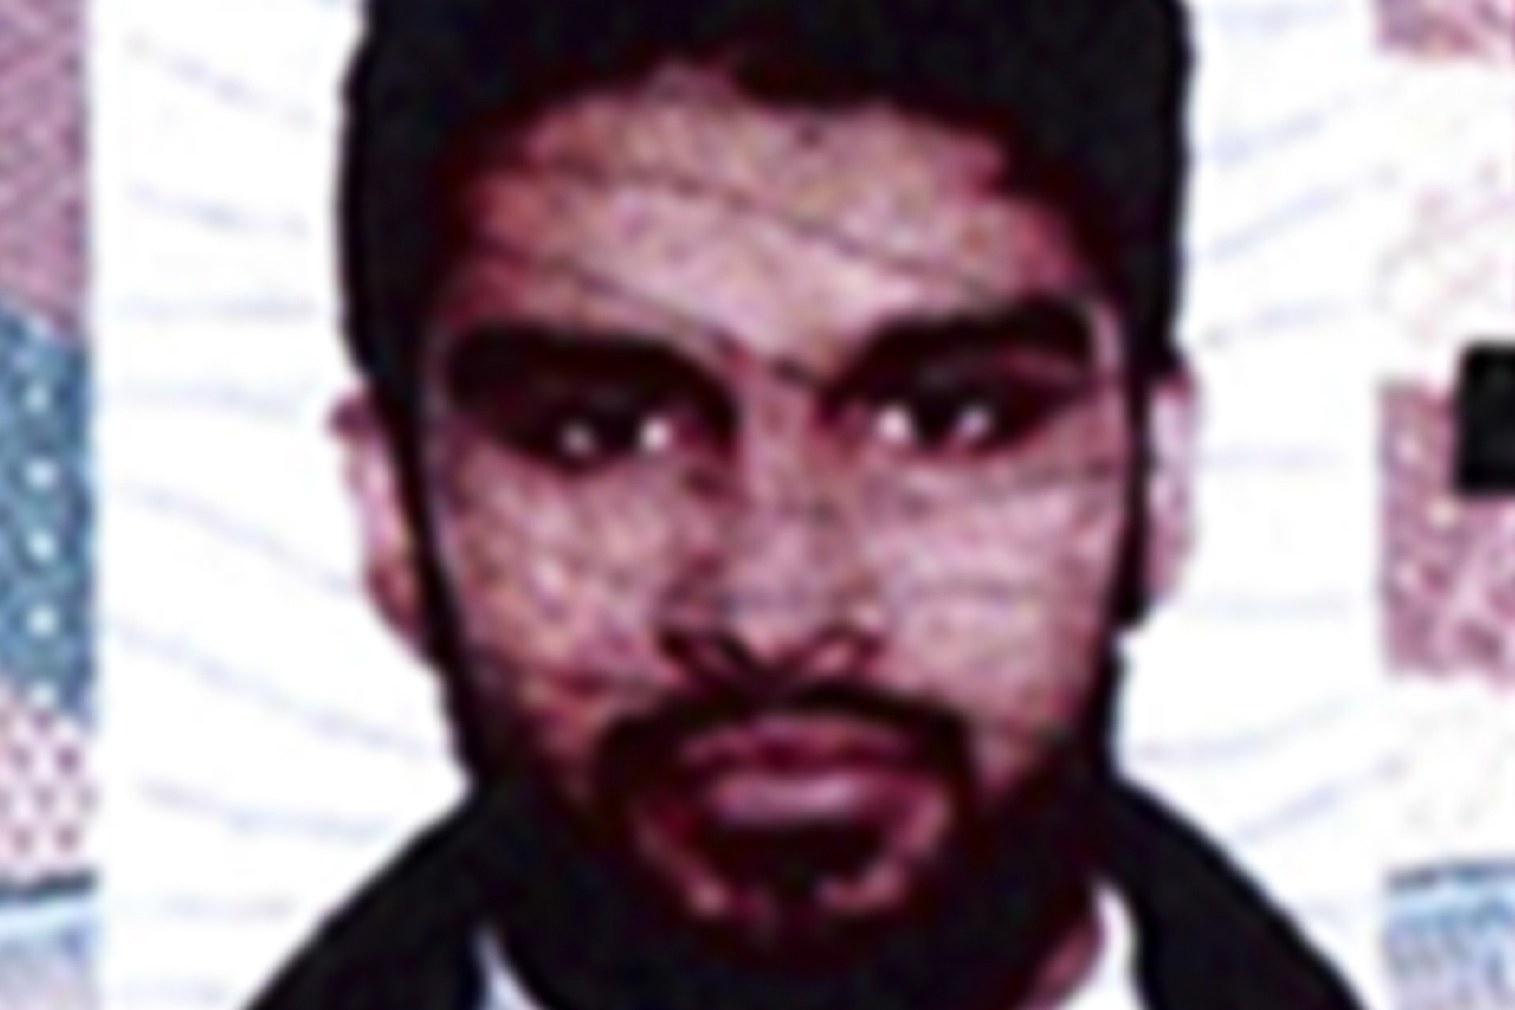 Mohammed Hamzah Khan in an undated passport photo provided by the U.S. Attorney's Office.  In Illinois, prosecutors recommended a five-year sentence for Khan, who pleaded guilty to trying to join militants abroad. (U.S. Attorney's Office/AP)